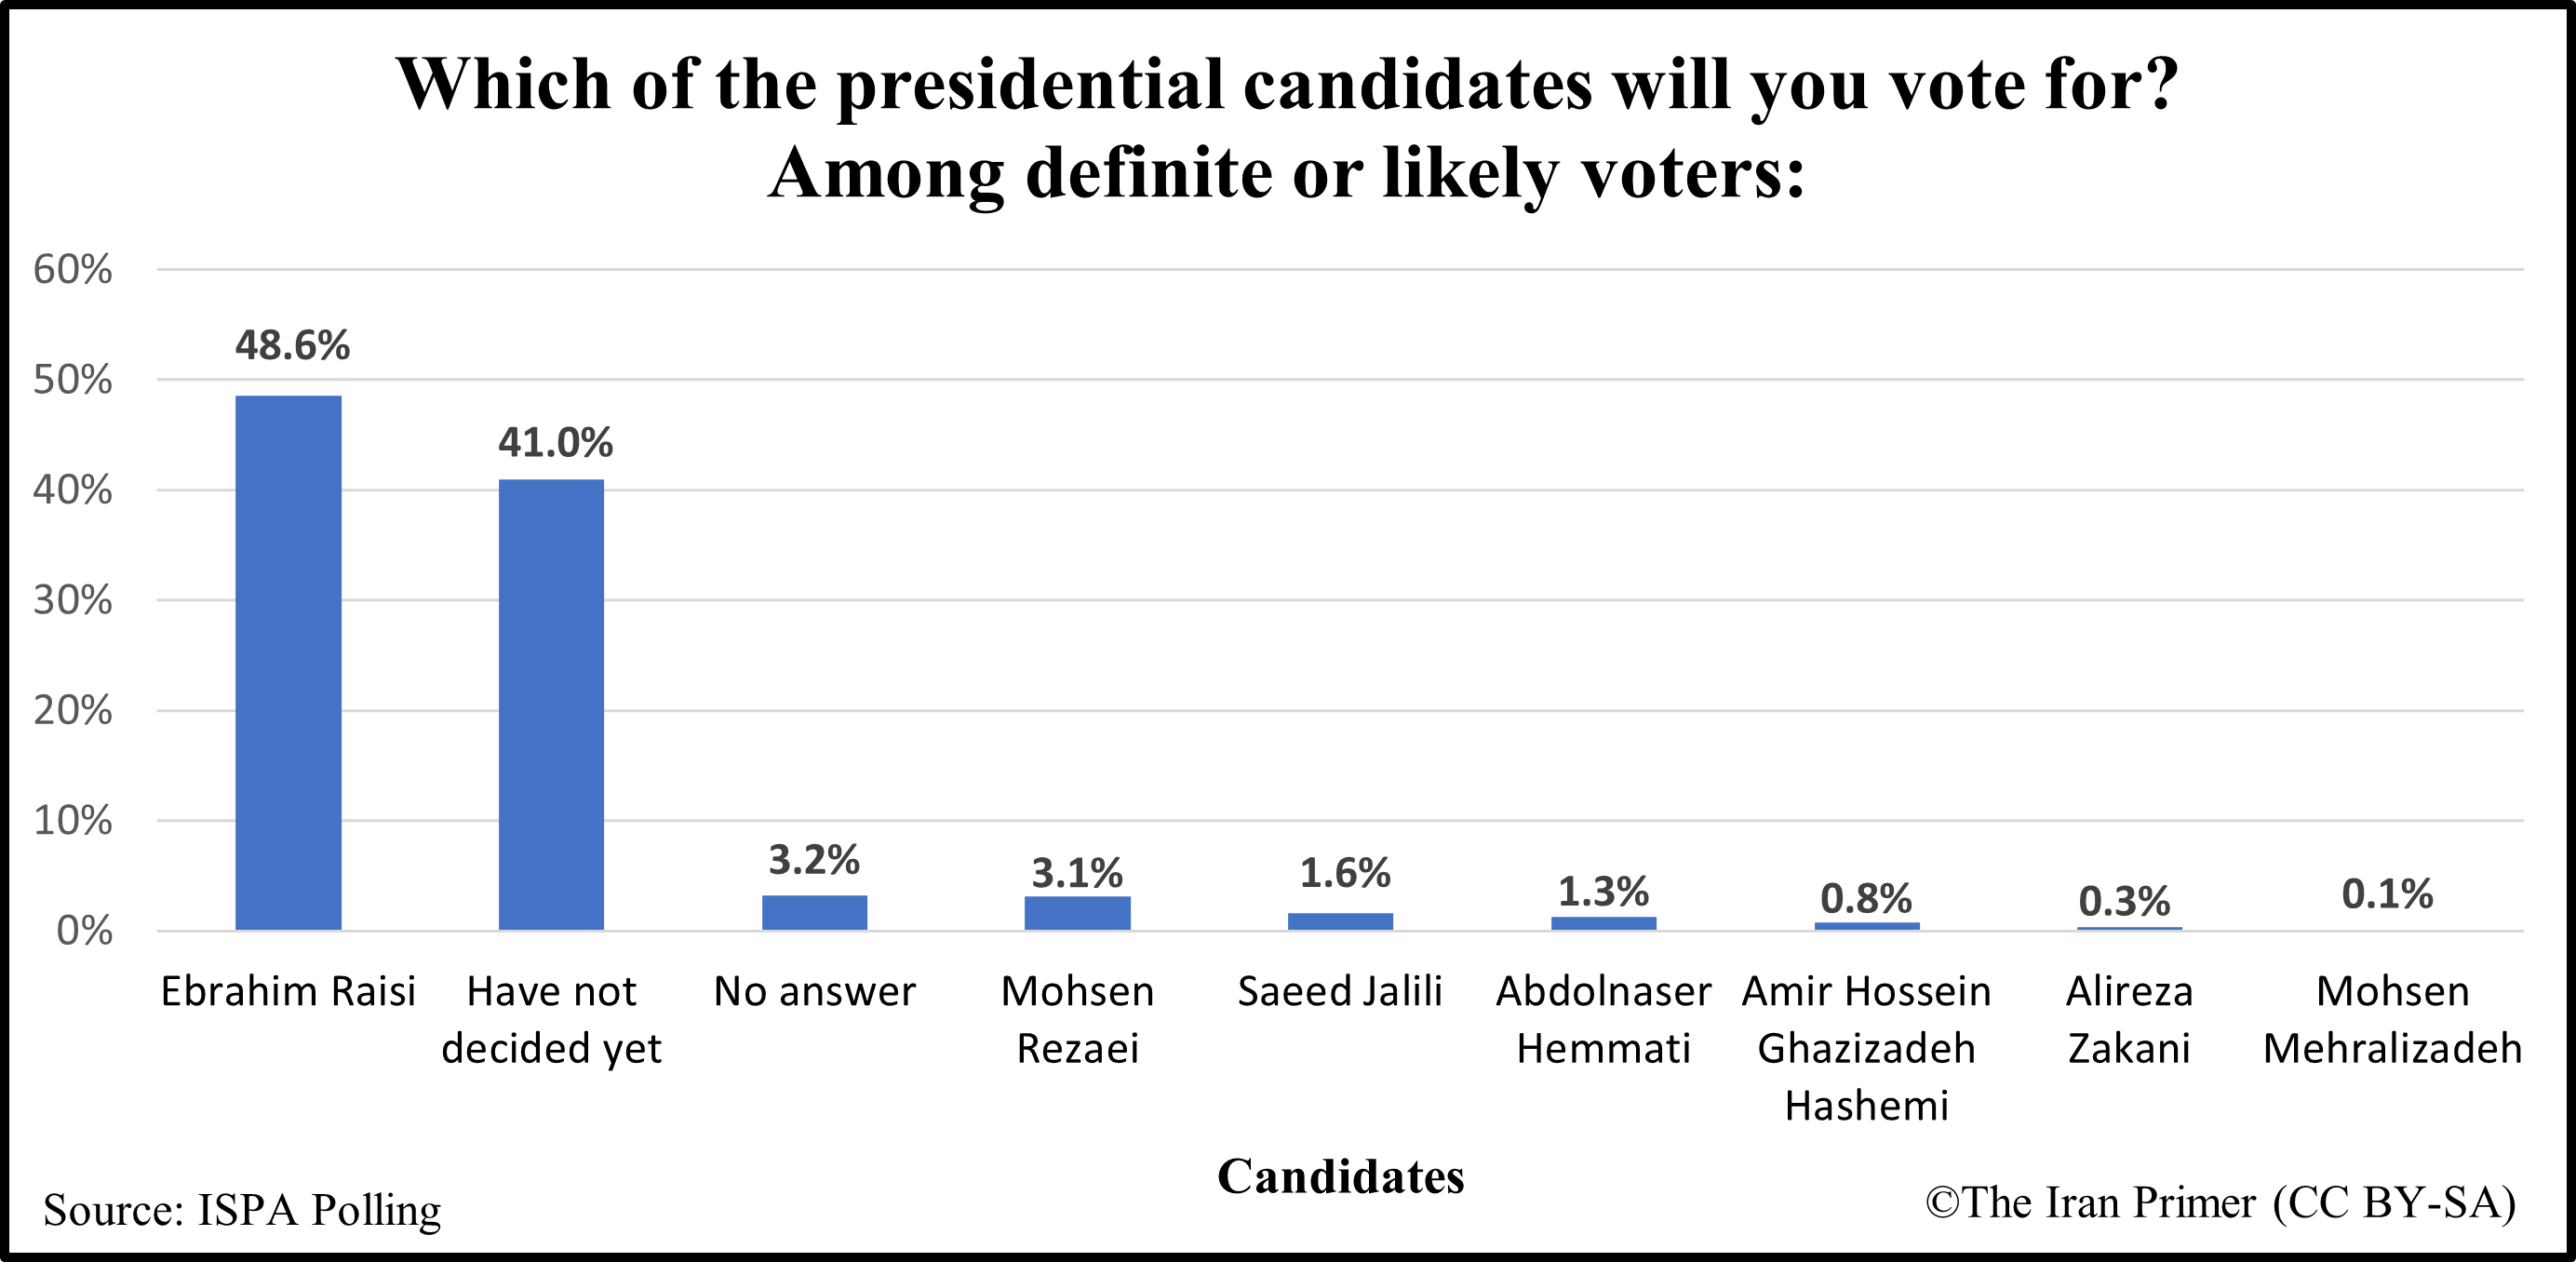 Preferred candidate among definite or likely voters graph